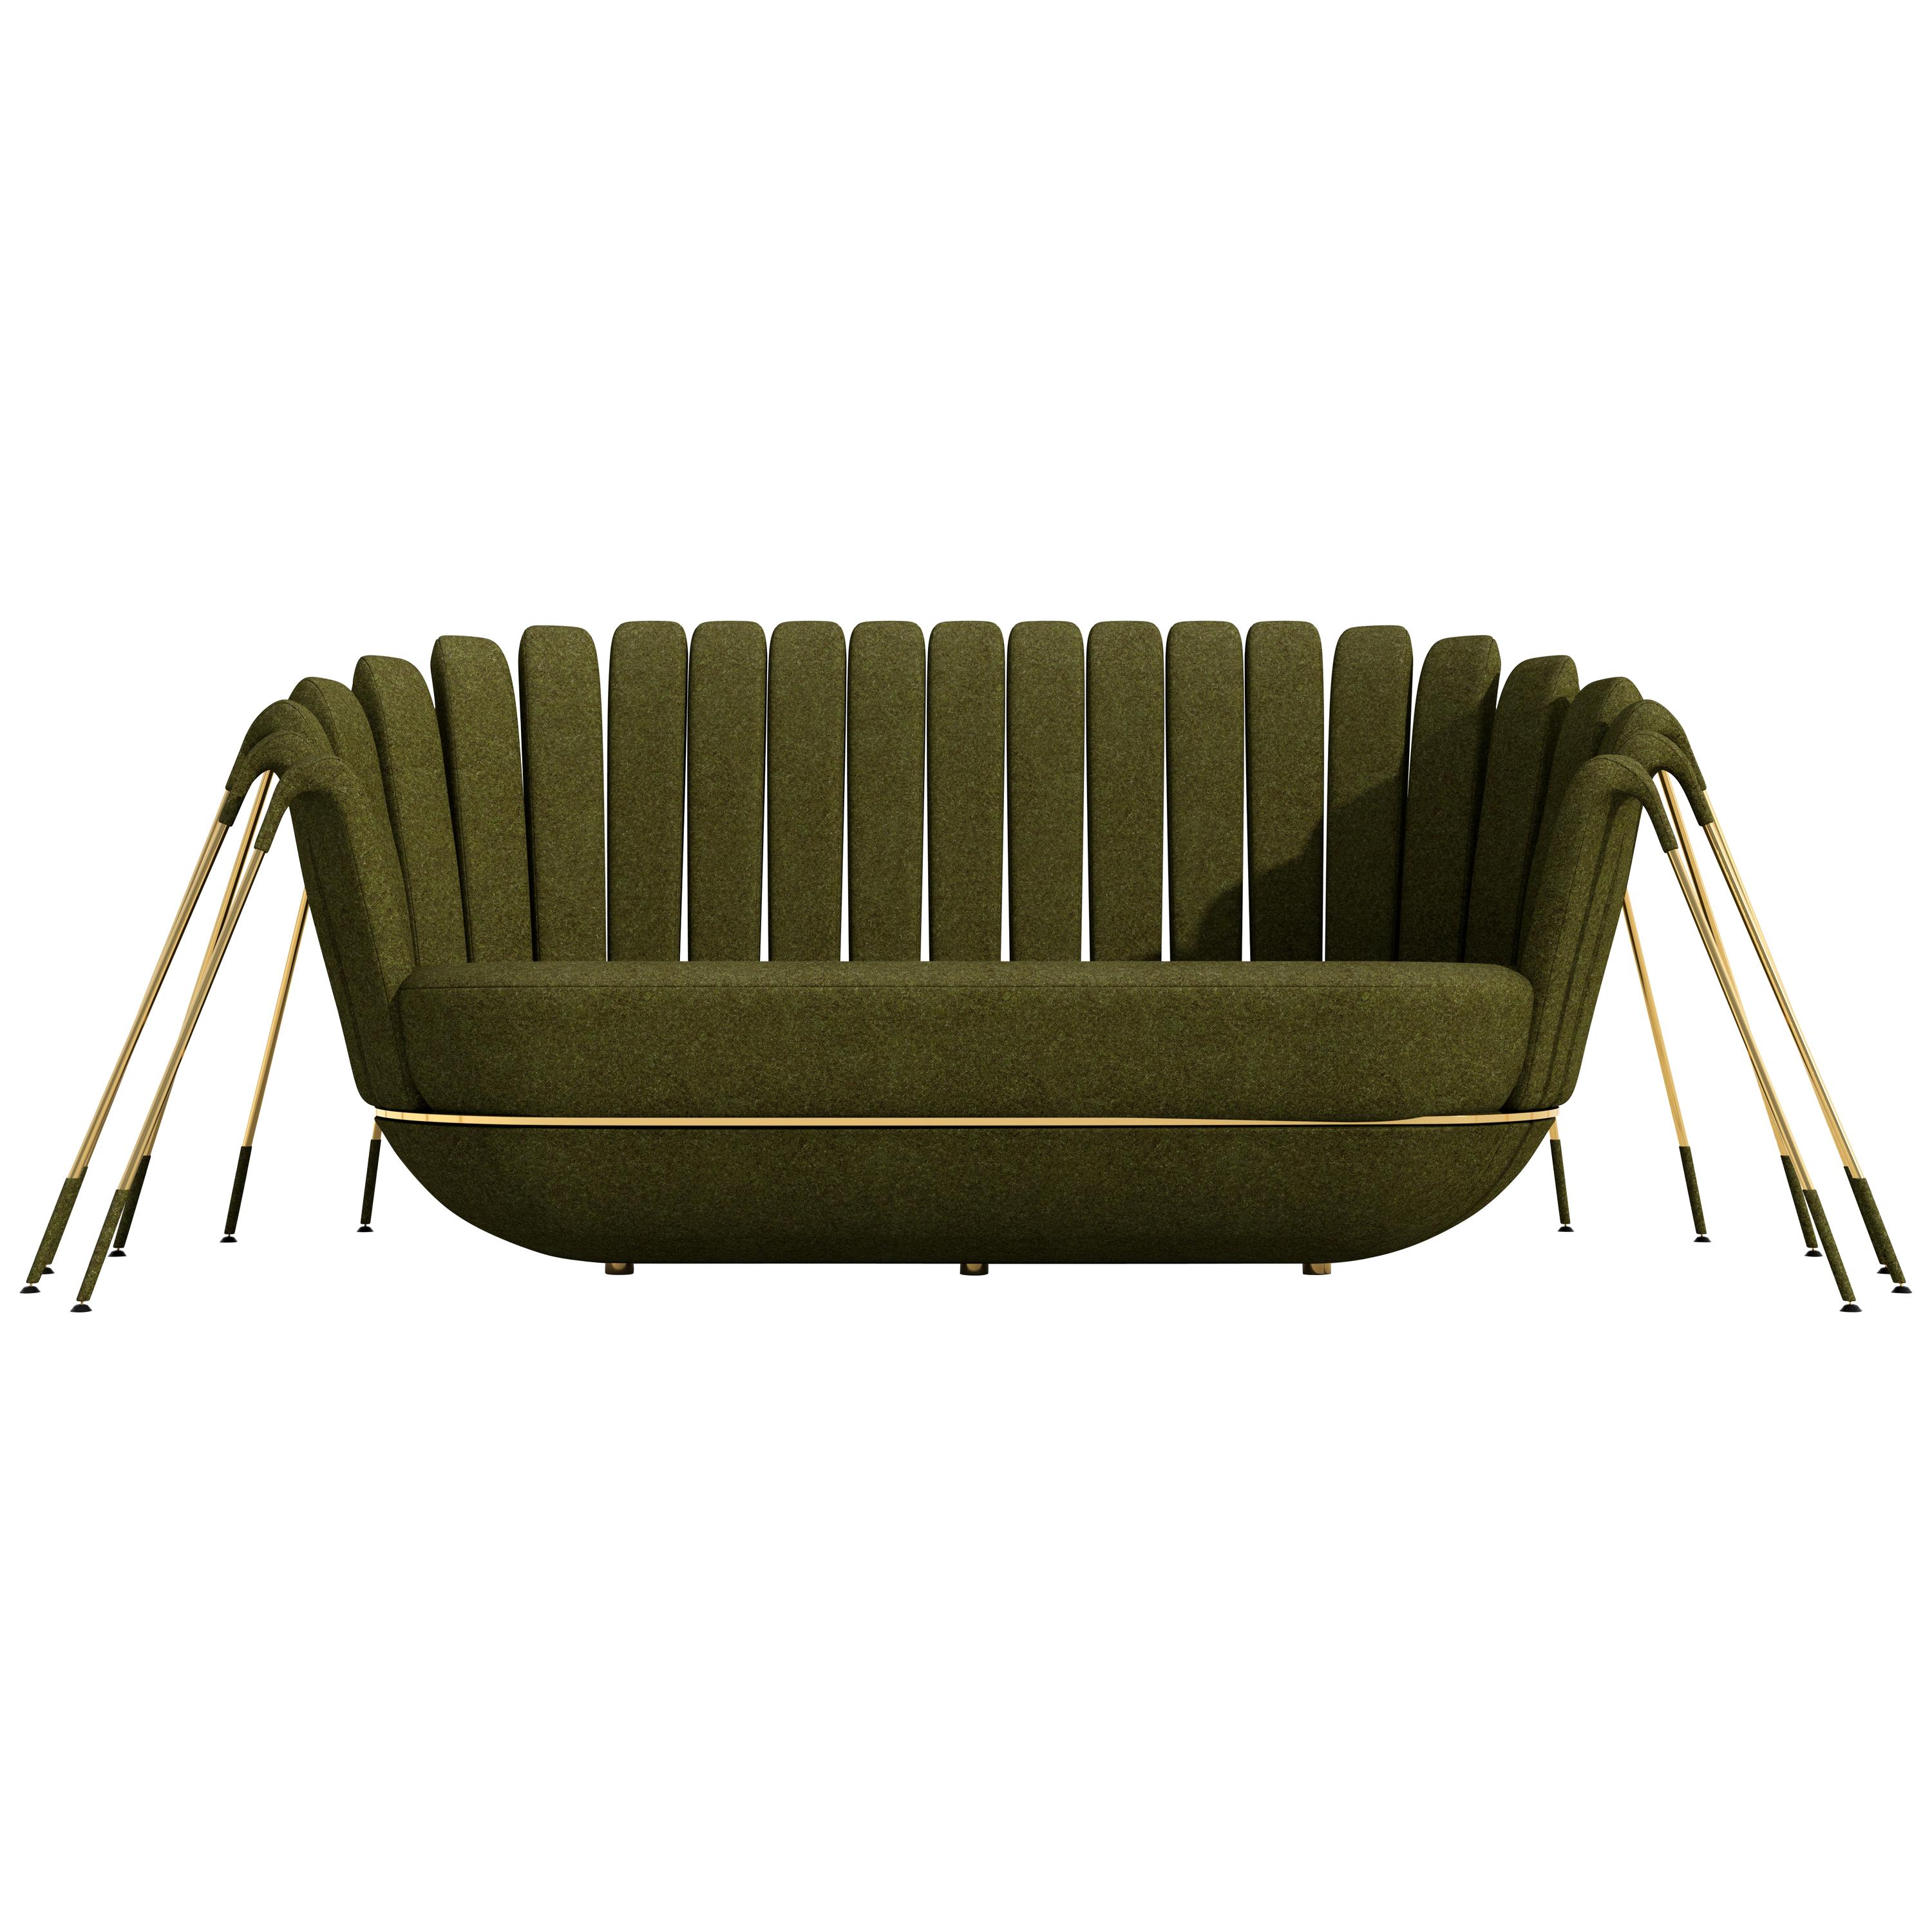 Les Araignée Sofa by Marc Ange with Gold Metal Legs and Green Velvet Upholstery For Sale